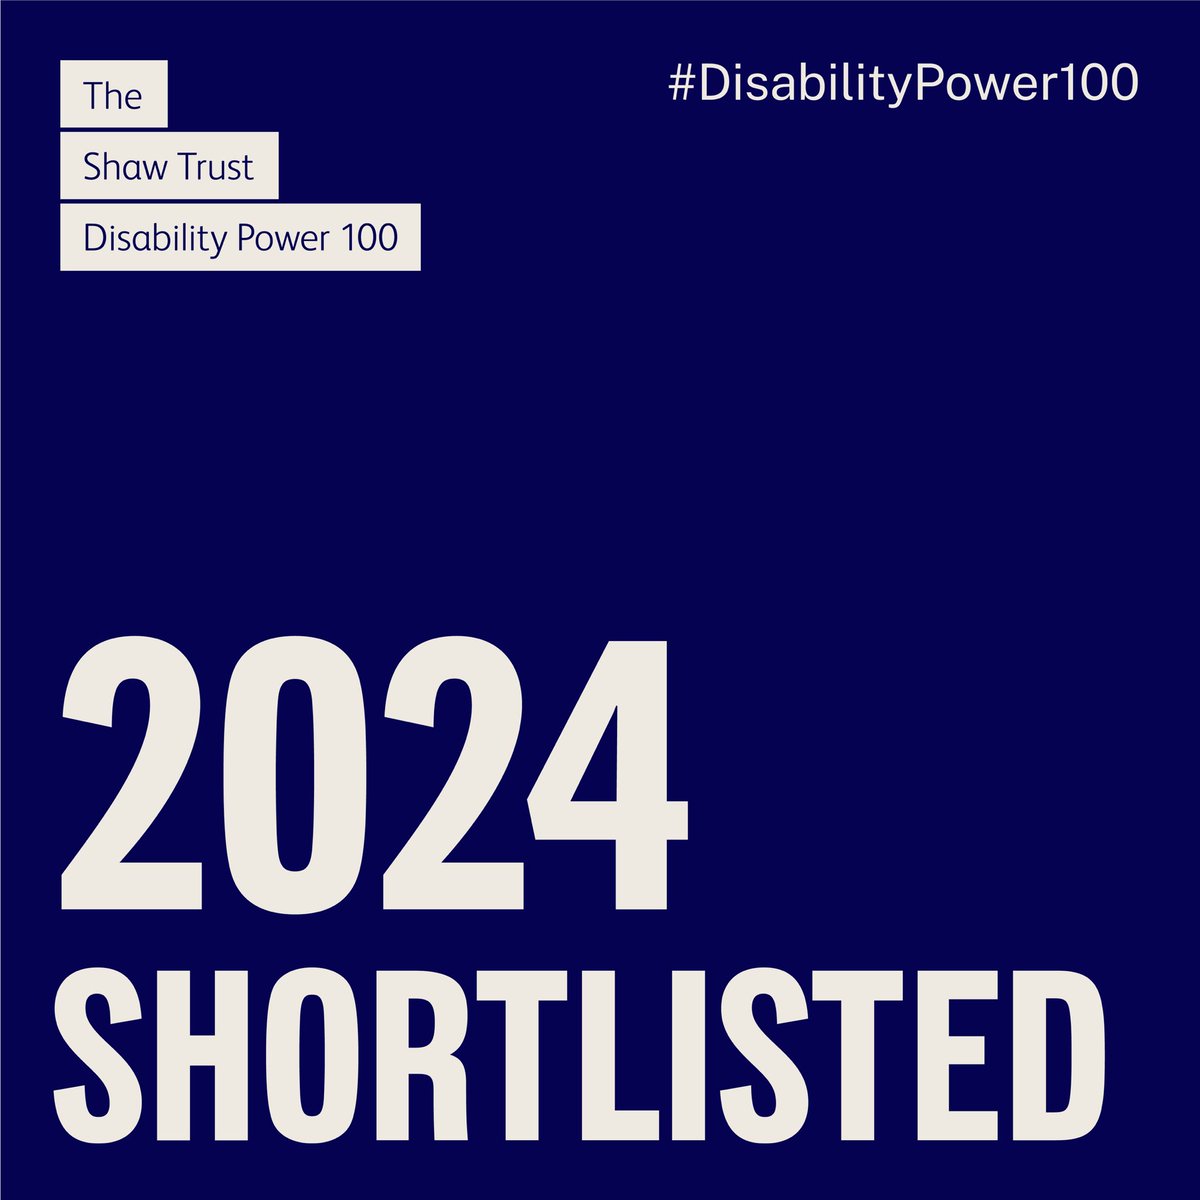 “We are delighted to share Happy Smiles Training has been shortlisted for their work on the @ShawTrust #DisabilityPower100” From 786 nominations, we are hugely grateful for this! There are so many more people/organisations who also deserve recognition - shoutout to them too 💛